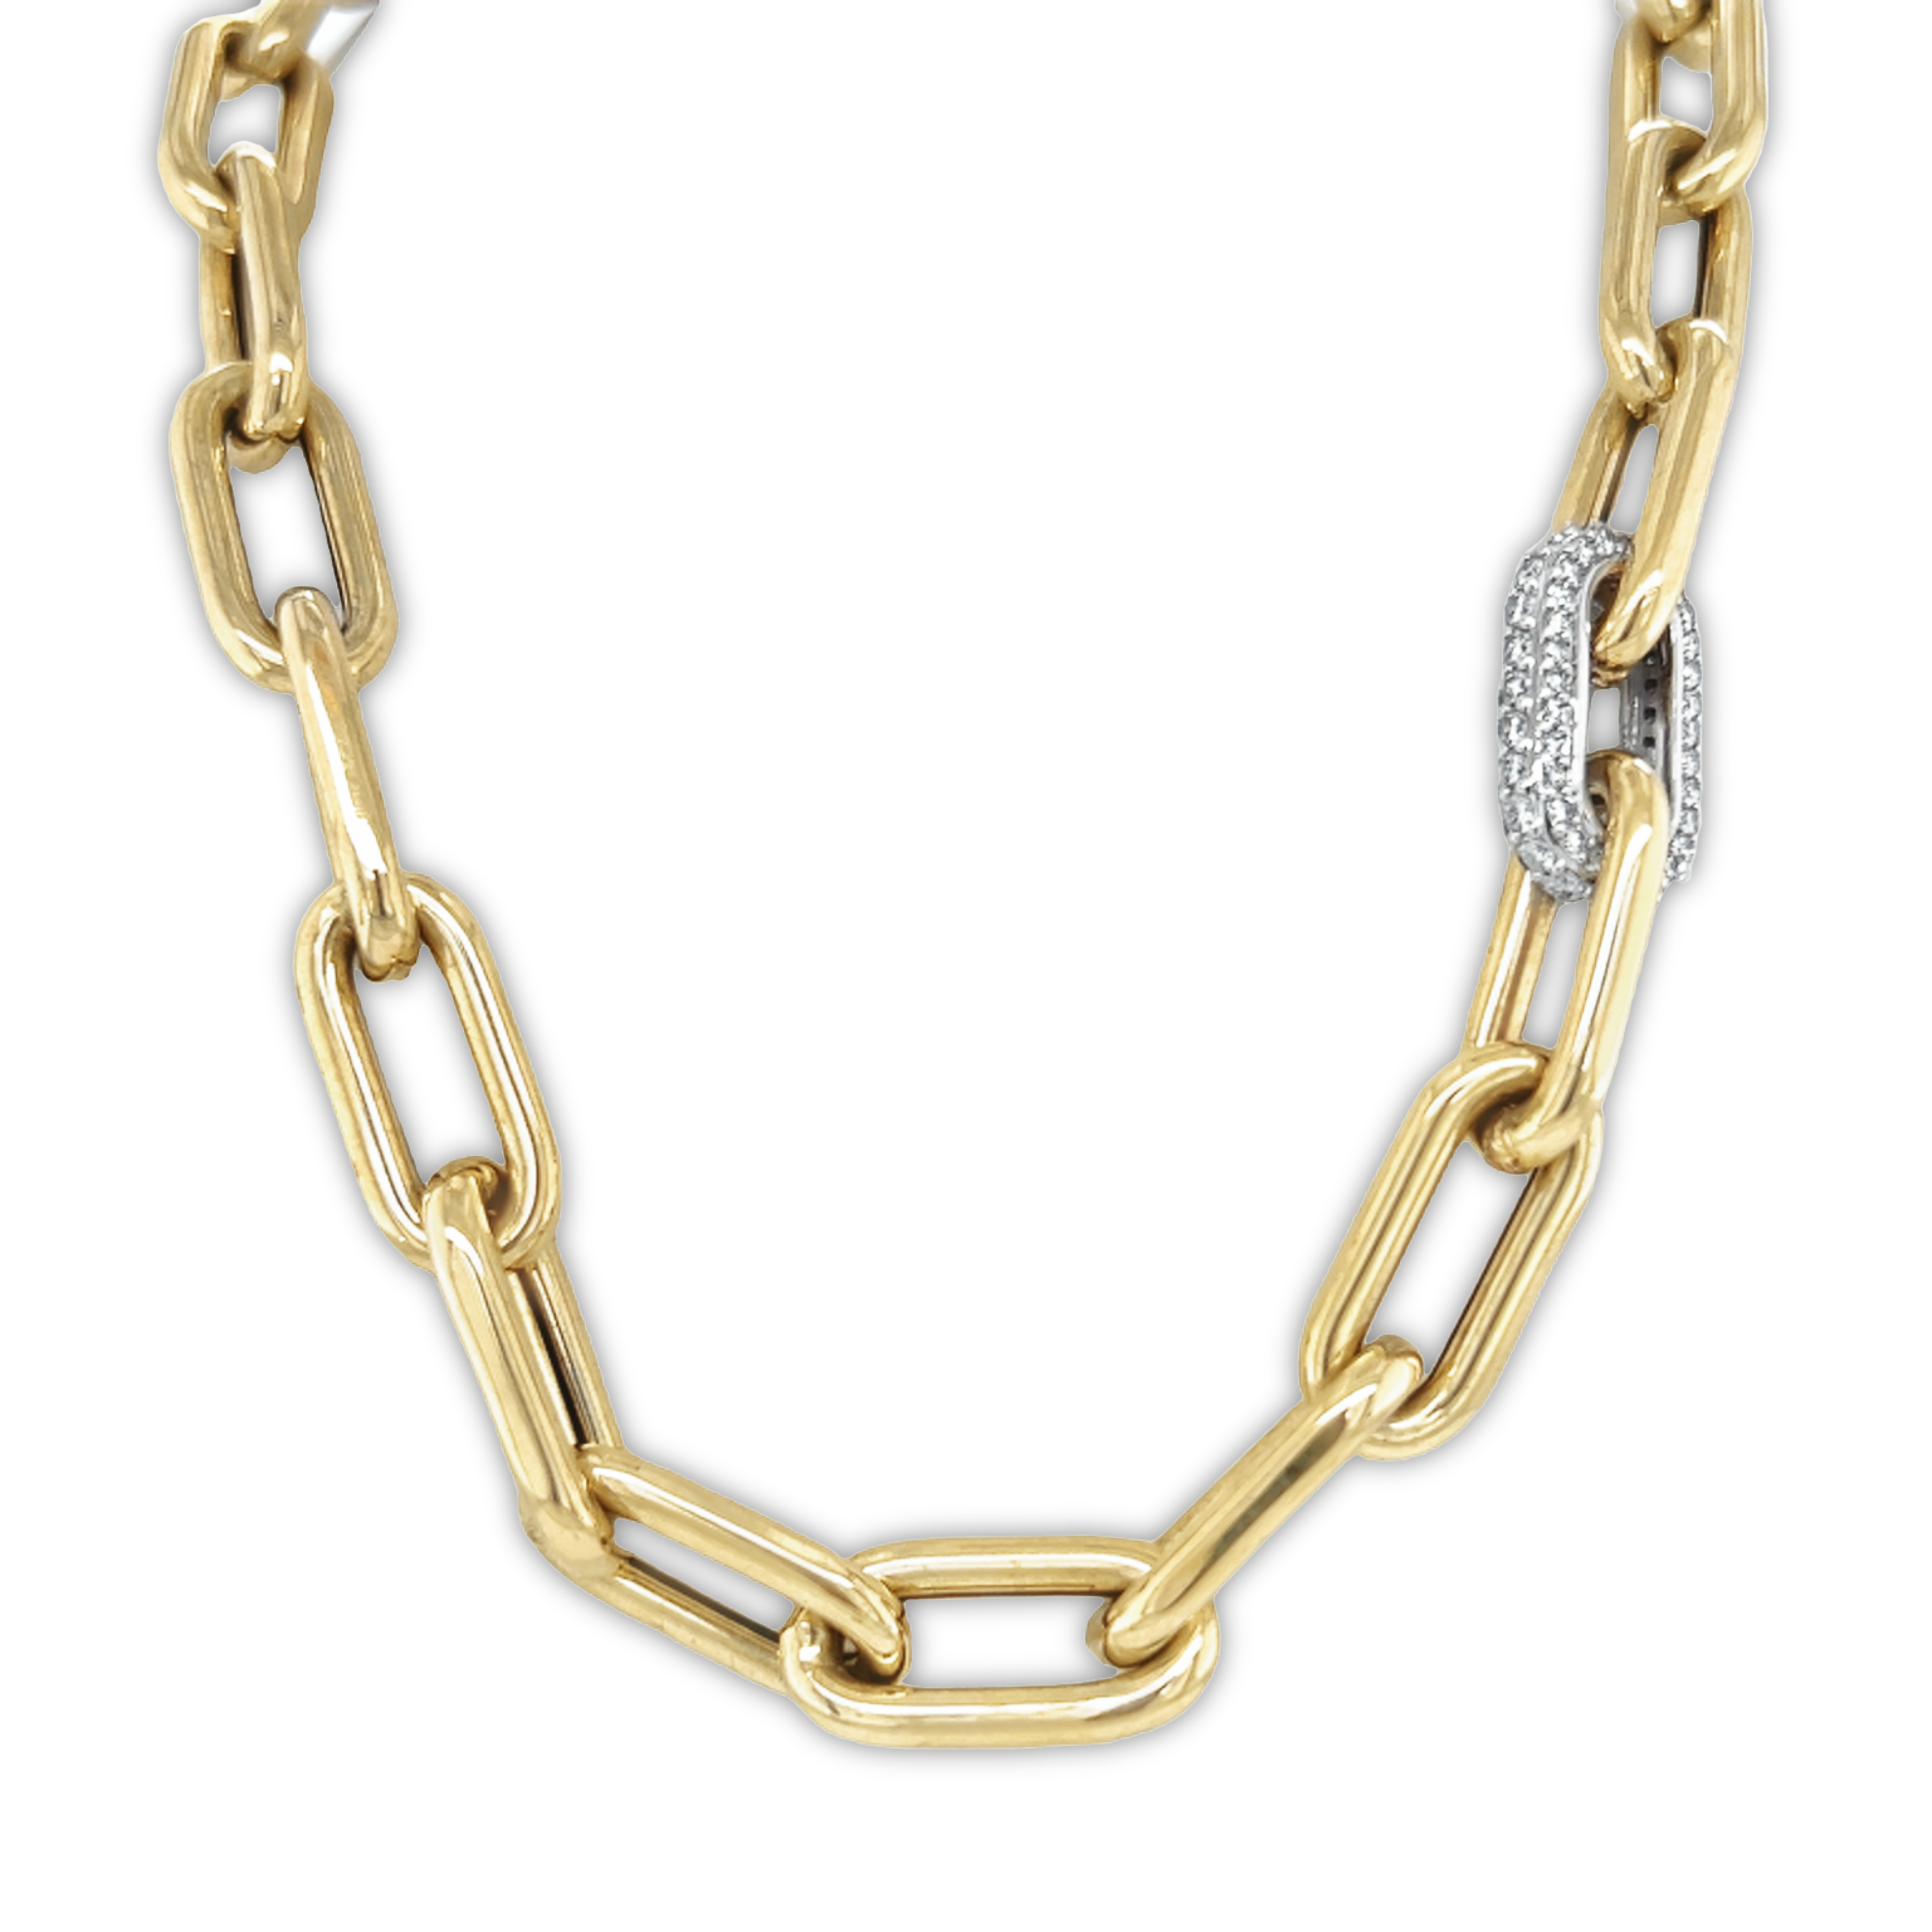 Featured image for “Chunky Paperclip Chain with White Gold Pavé Diamond Link”